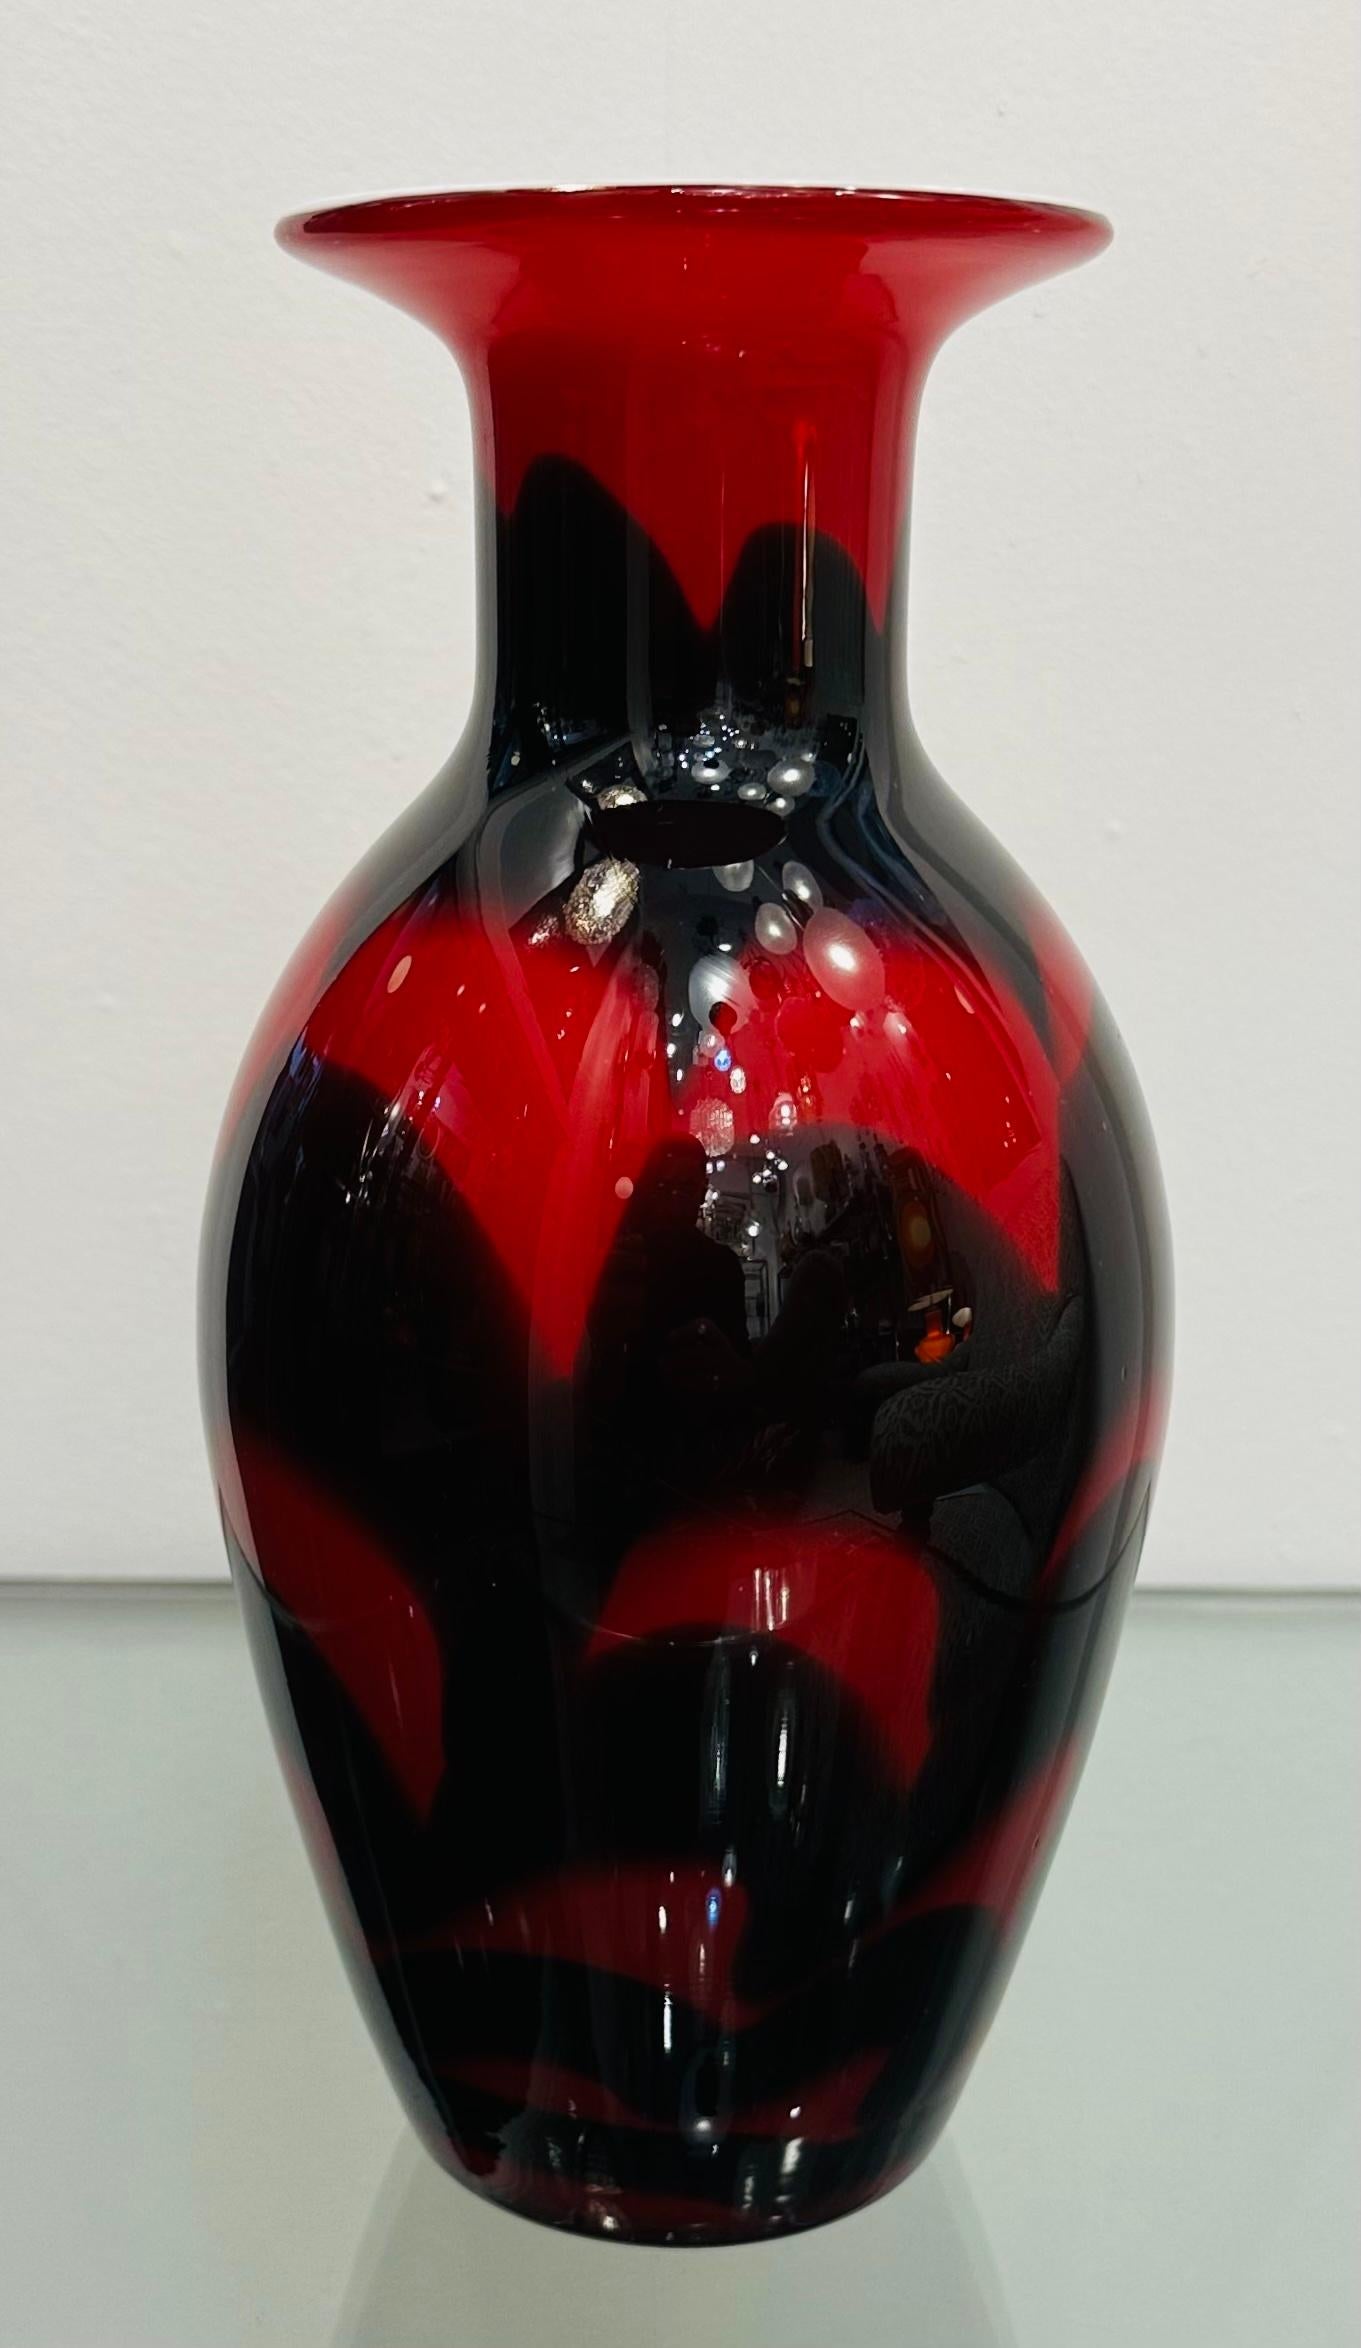 1950s Italian Murano art glass vase attributed to Carlo Moretti.  A red glass vase overlaid with a black abstract pattern with a white encased interior.  Typical style of Moretti.  In very good condition with no chips, scratches or